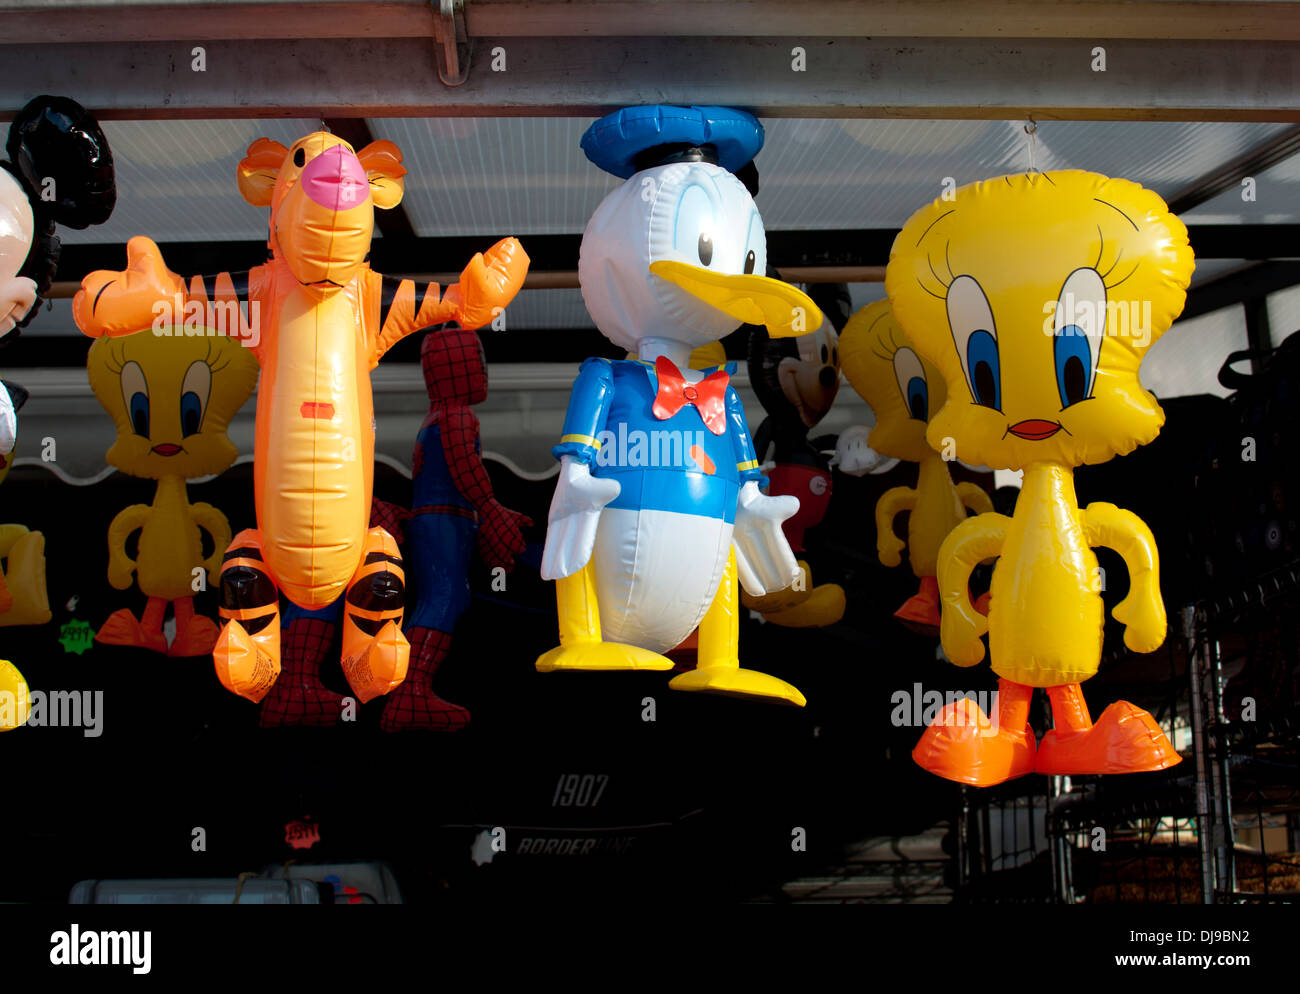 Inflatable cartoon characters on sale outside a shop Stock Photo